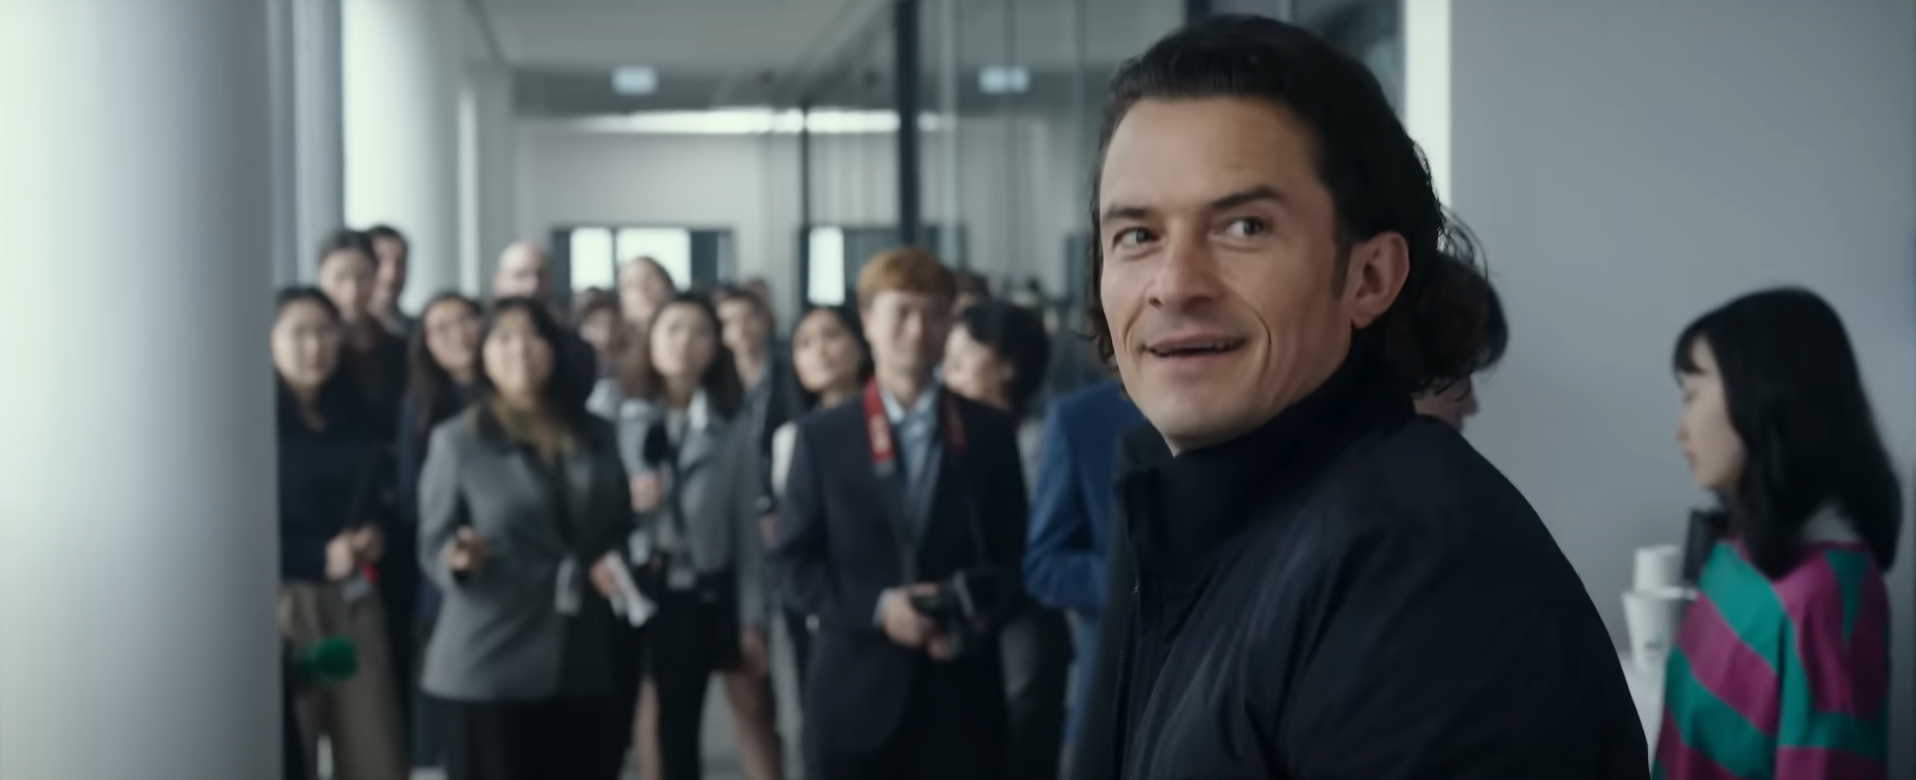 Orlando Bloom - Grand Turismo ©Sony Pictures